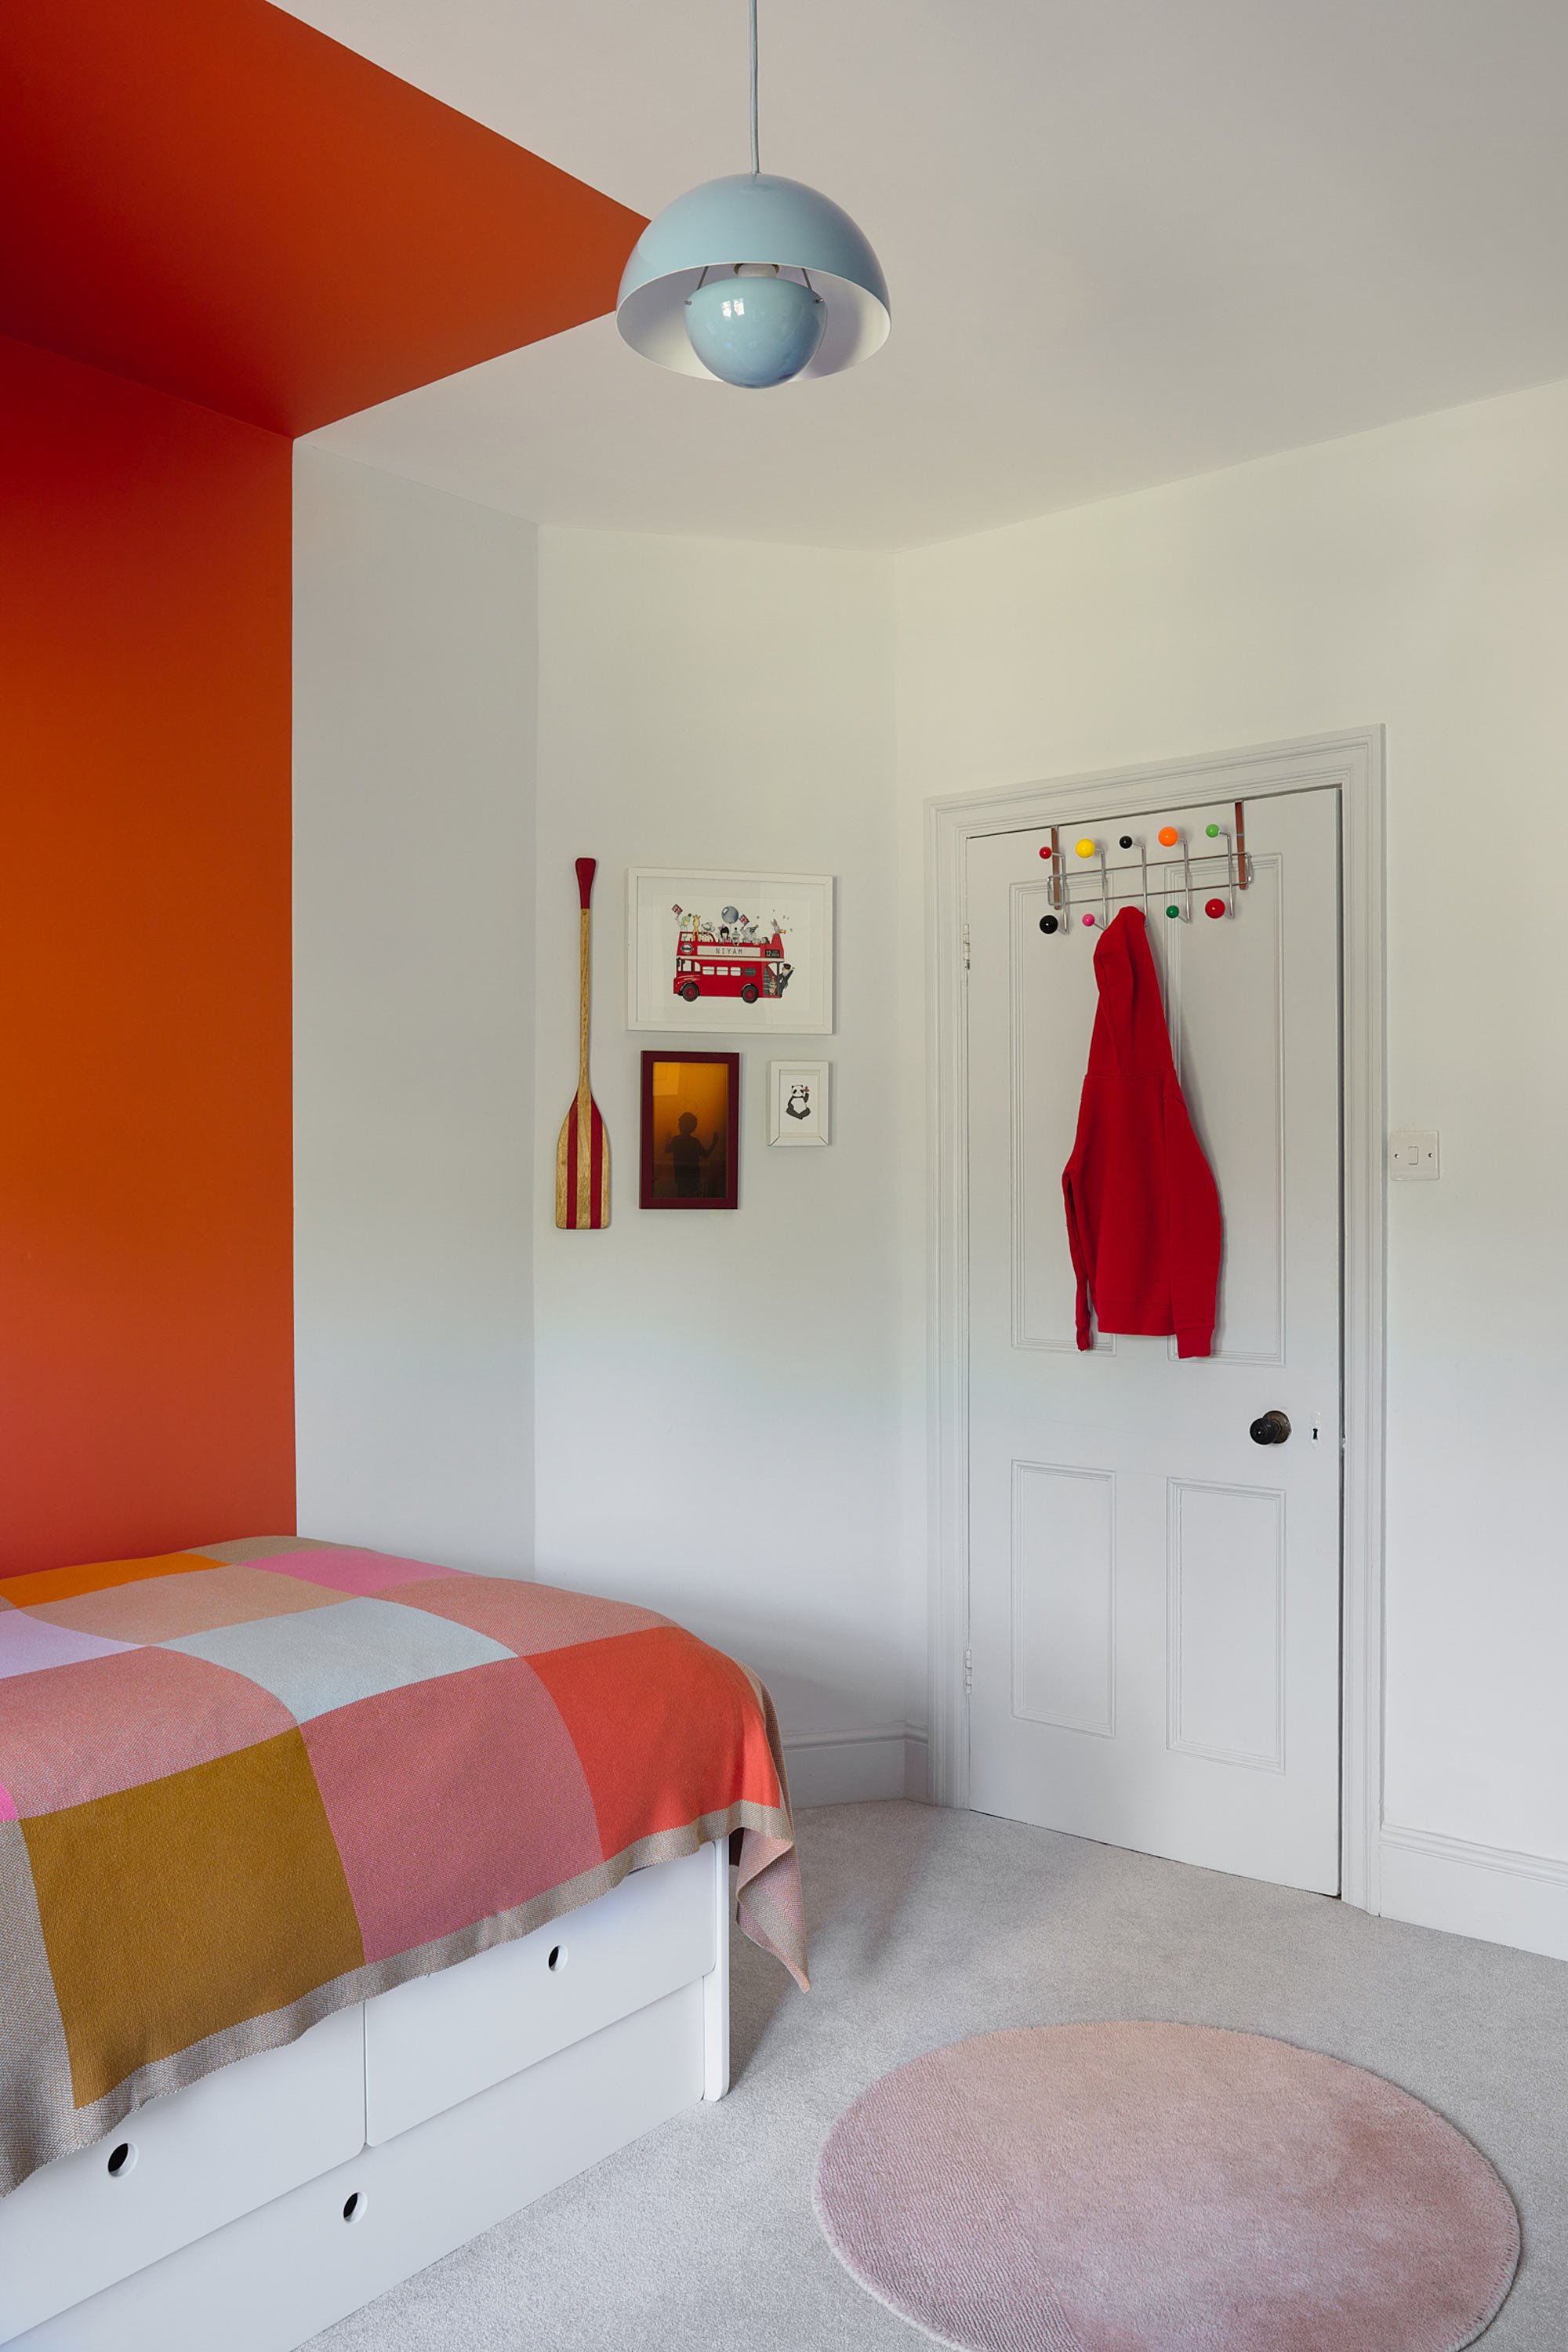 corner-of-kids-bedroom-with-orange-wall-and-chequered-blanket.jpg